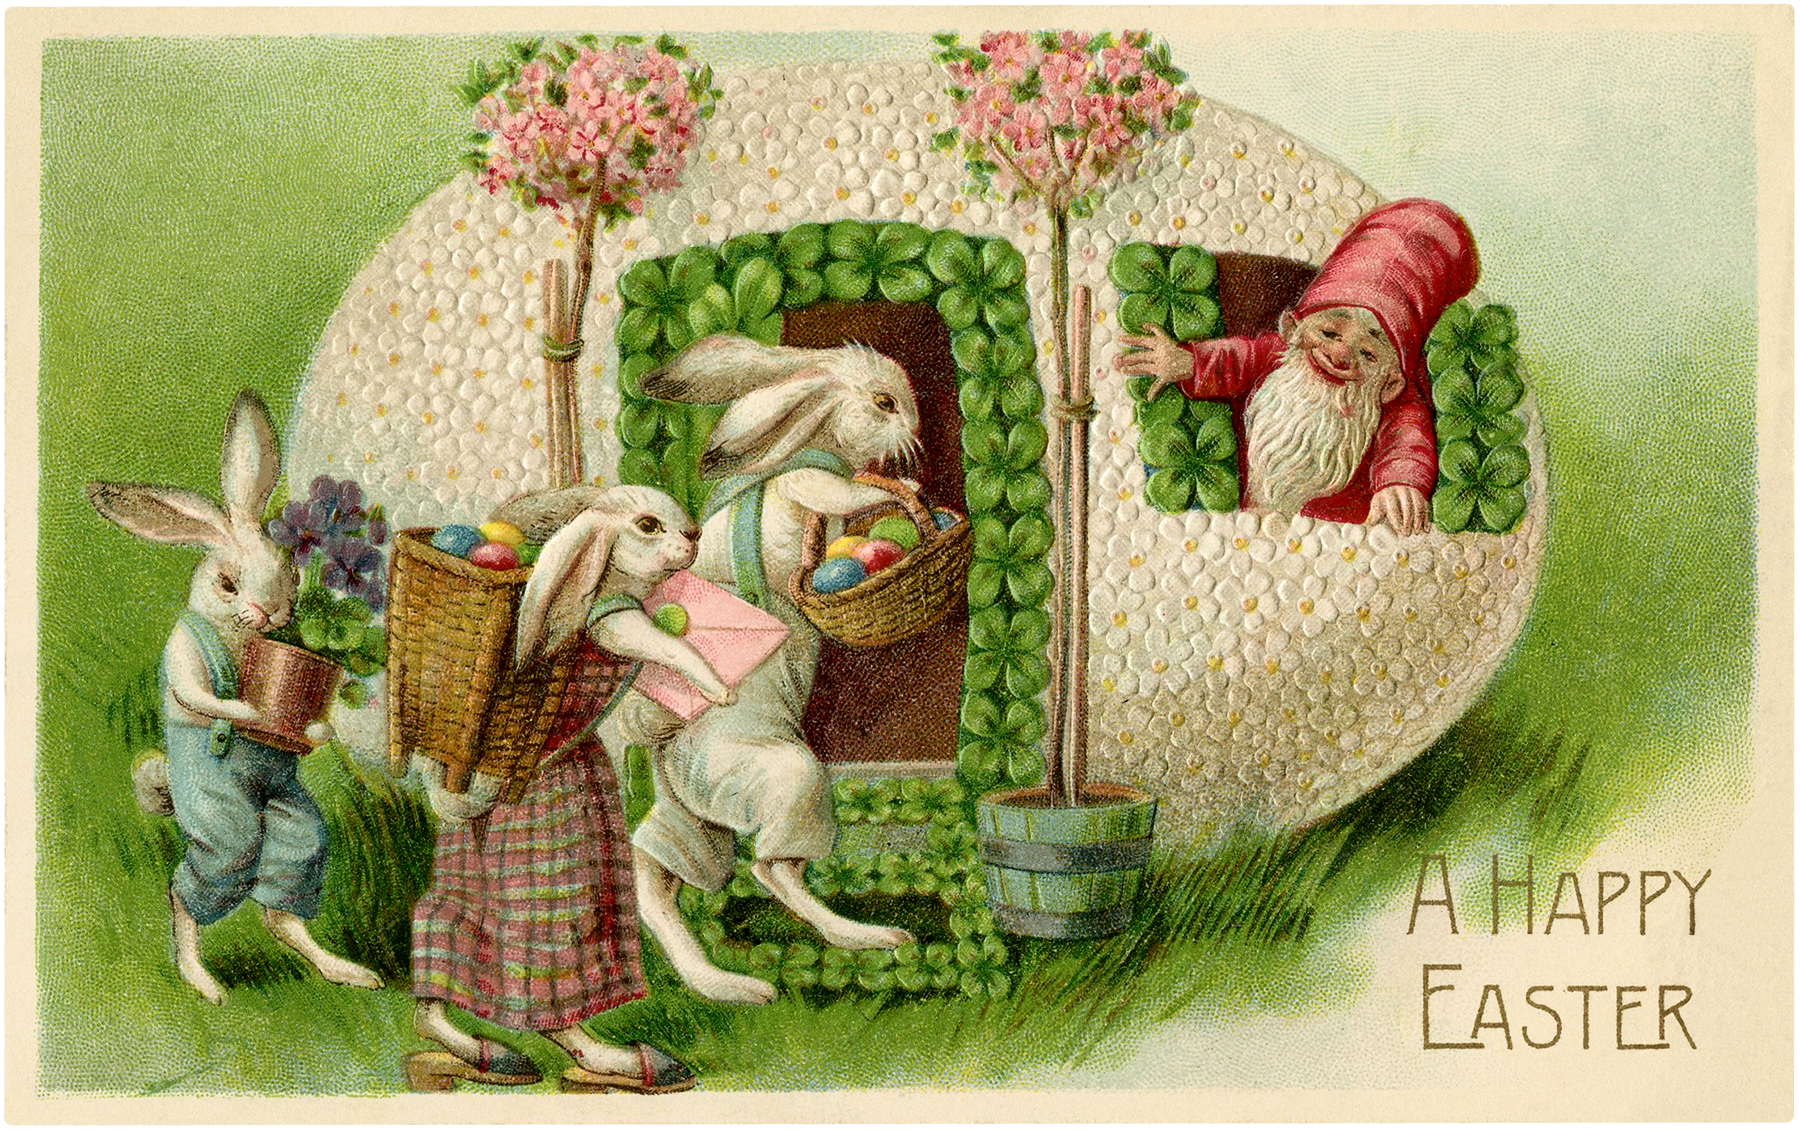 Vintage Easter Bunnies And Gnome Image The Graphics Fairy